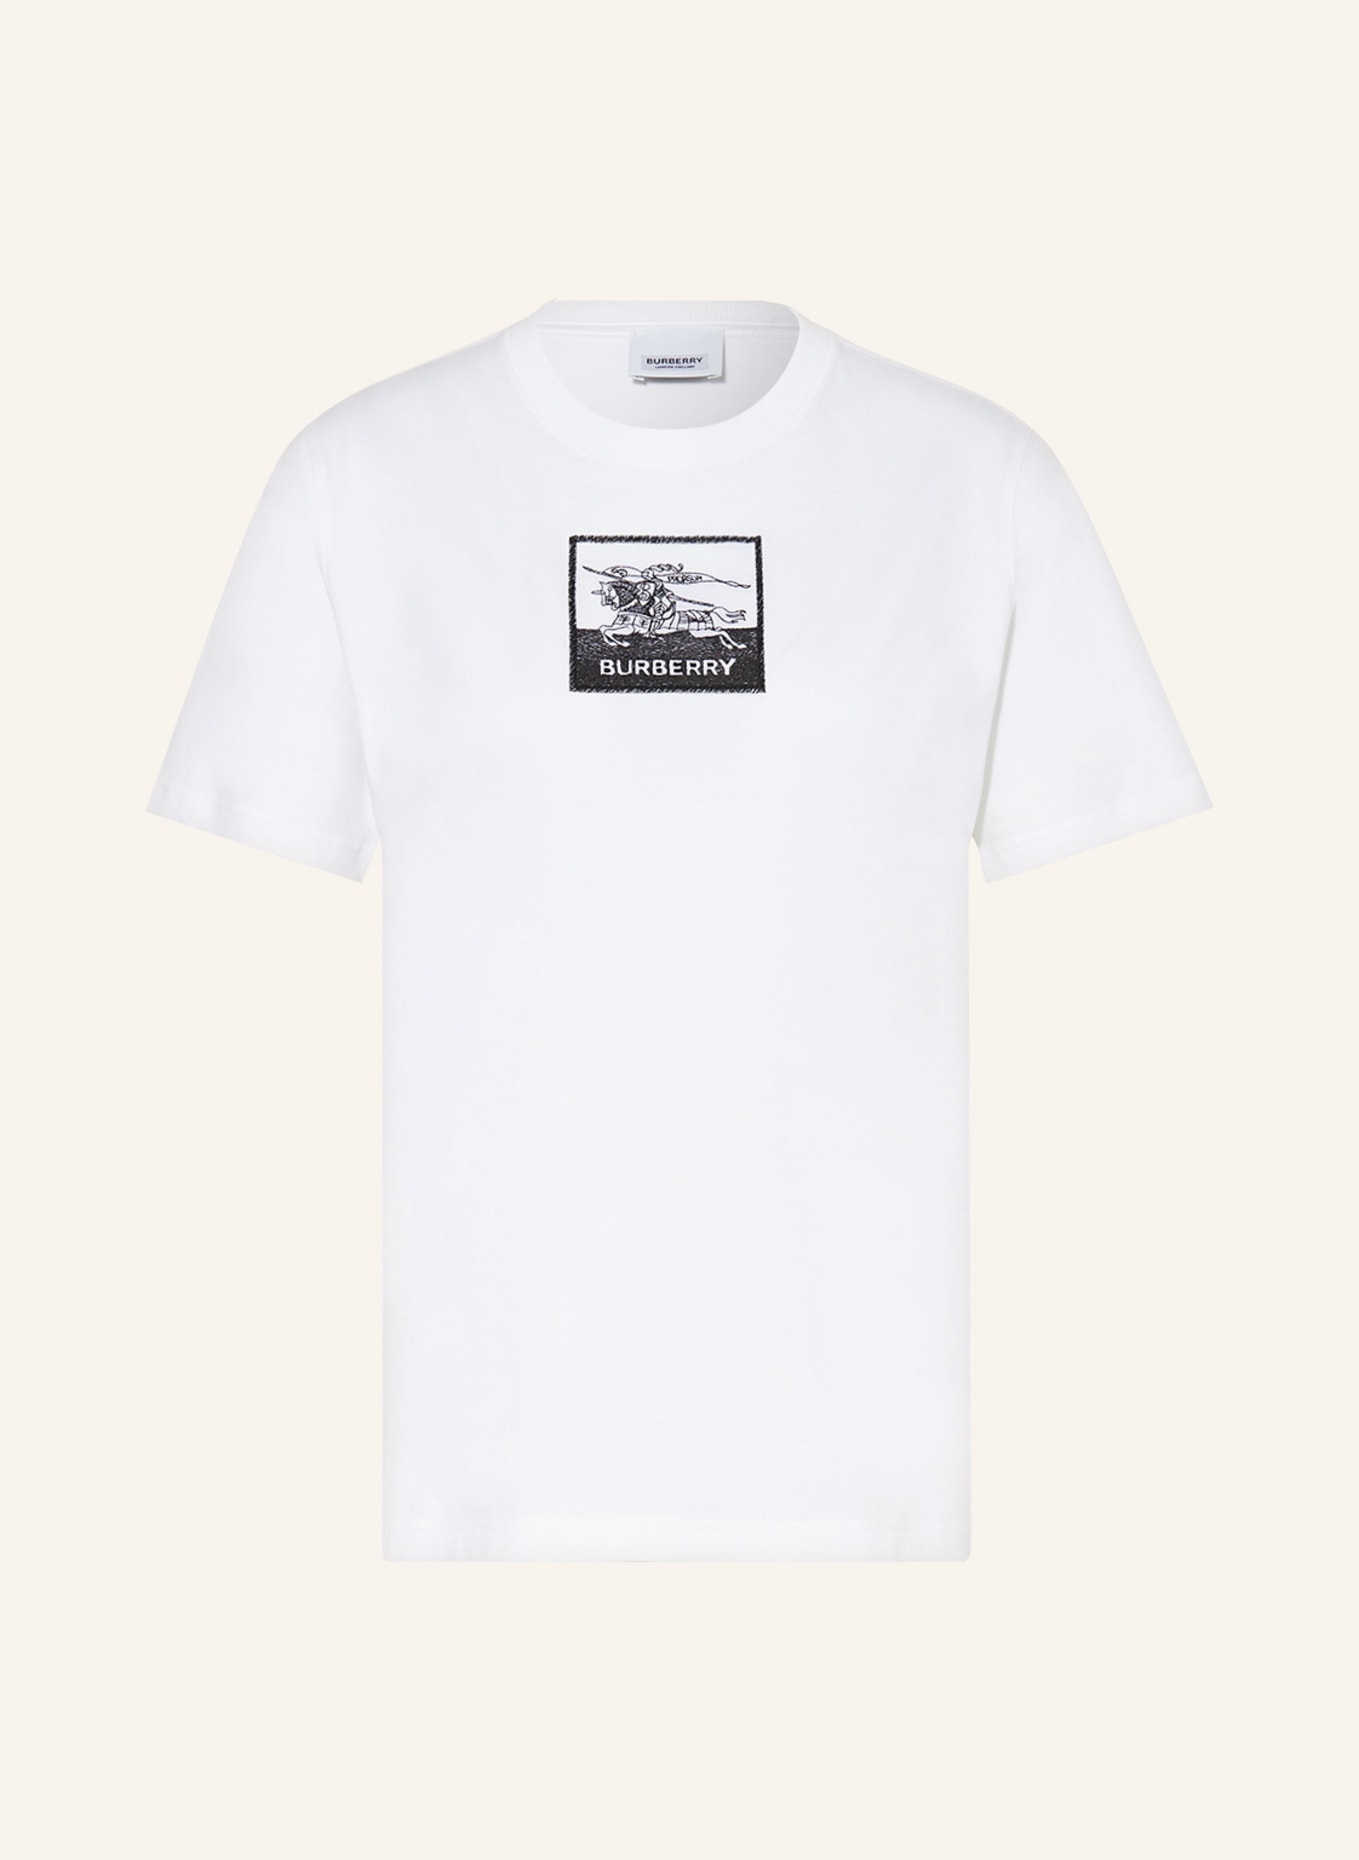 BURBERRY T-shirt MARGOT, Color: WHITE (Image 1)